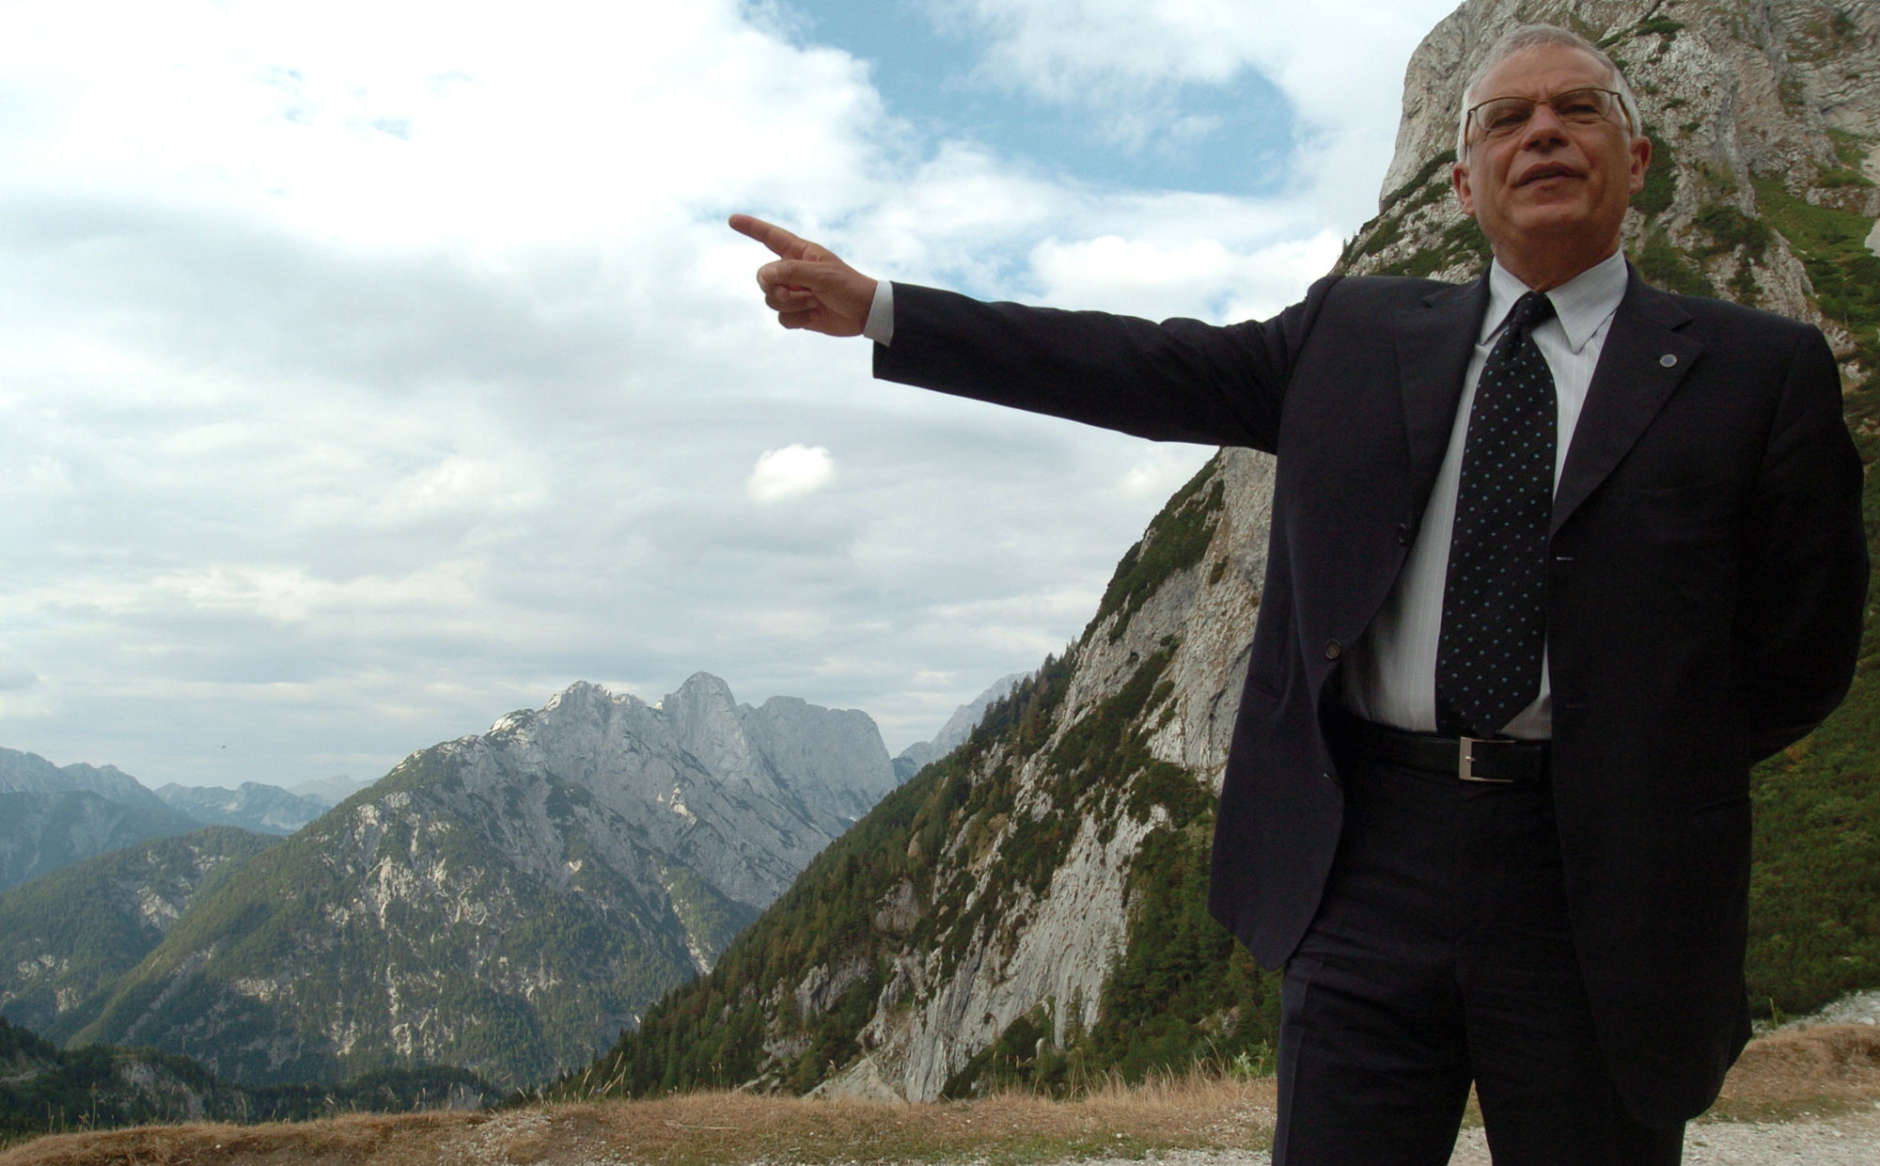 President of the European Parliament Josep Borrell points the highest mountain of Slovenia, Triglav, 2864 meters (9,396 feet) high, before attending the 90th anniversary of the Russian chapel built by the Russian prisoners in 1916 on the mountain road over the Vrsic pass, Slovenia, around 55 miles (88 km) north-west of Ljubljana, Sunday, July 30, 2006. (AP Photo/Denis Sarkic)